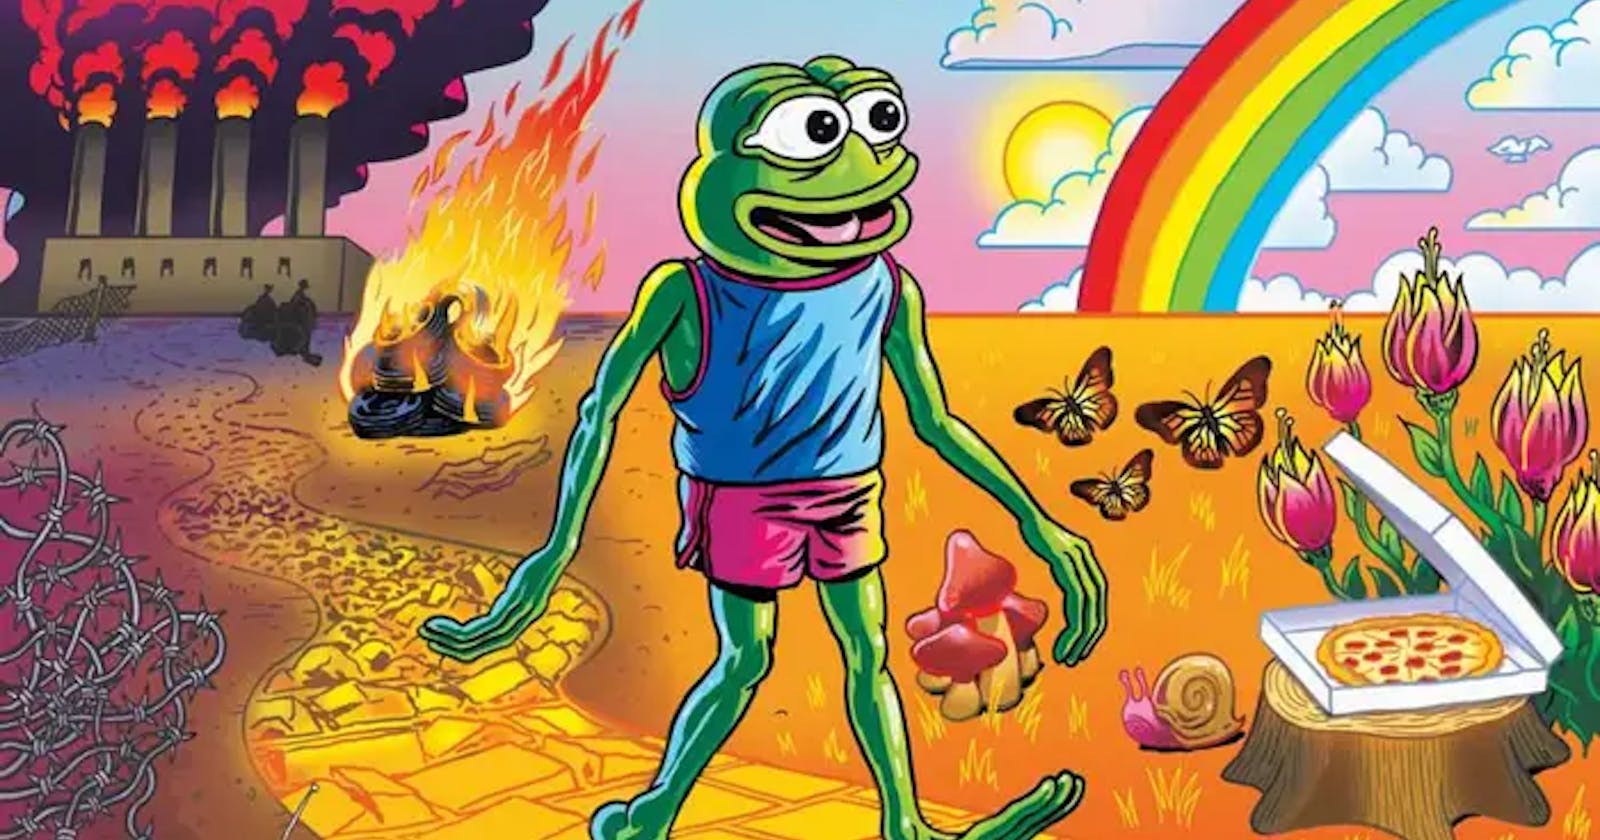 $PEPE Mania: Unraveling the Hype Behind the Internet's Trendiest Memecoin